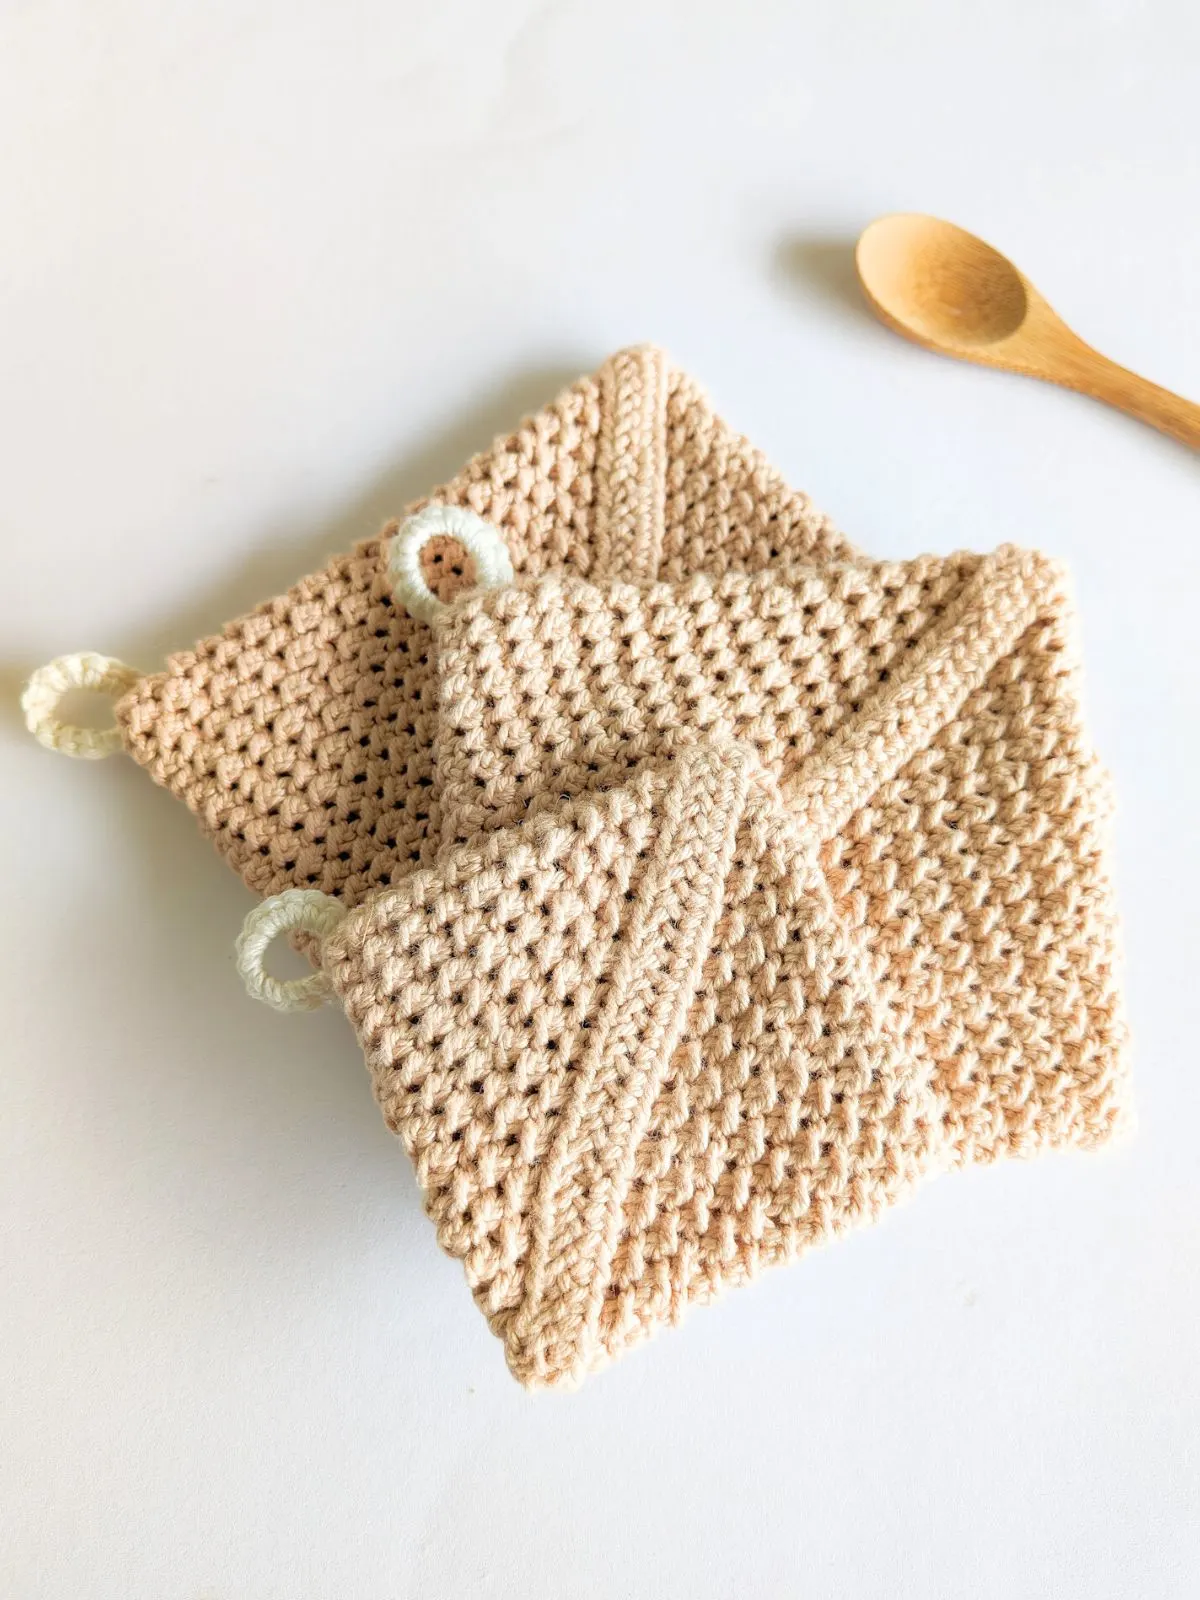 3 crochet potholders in small, medium, and large size.